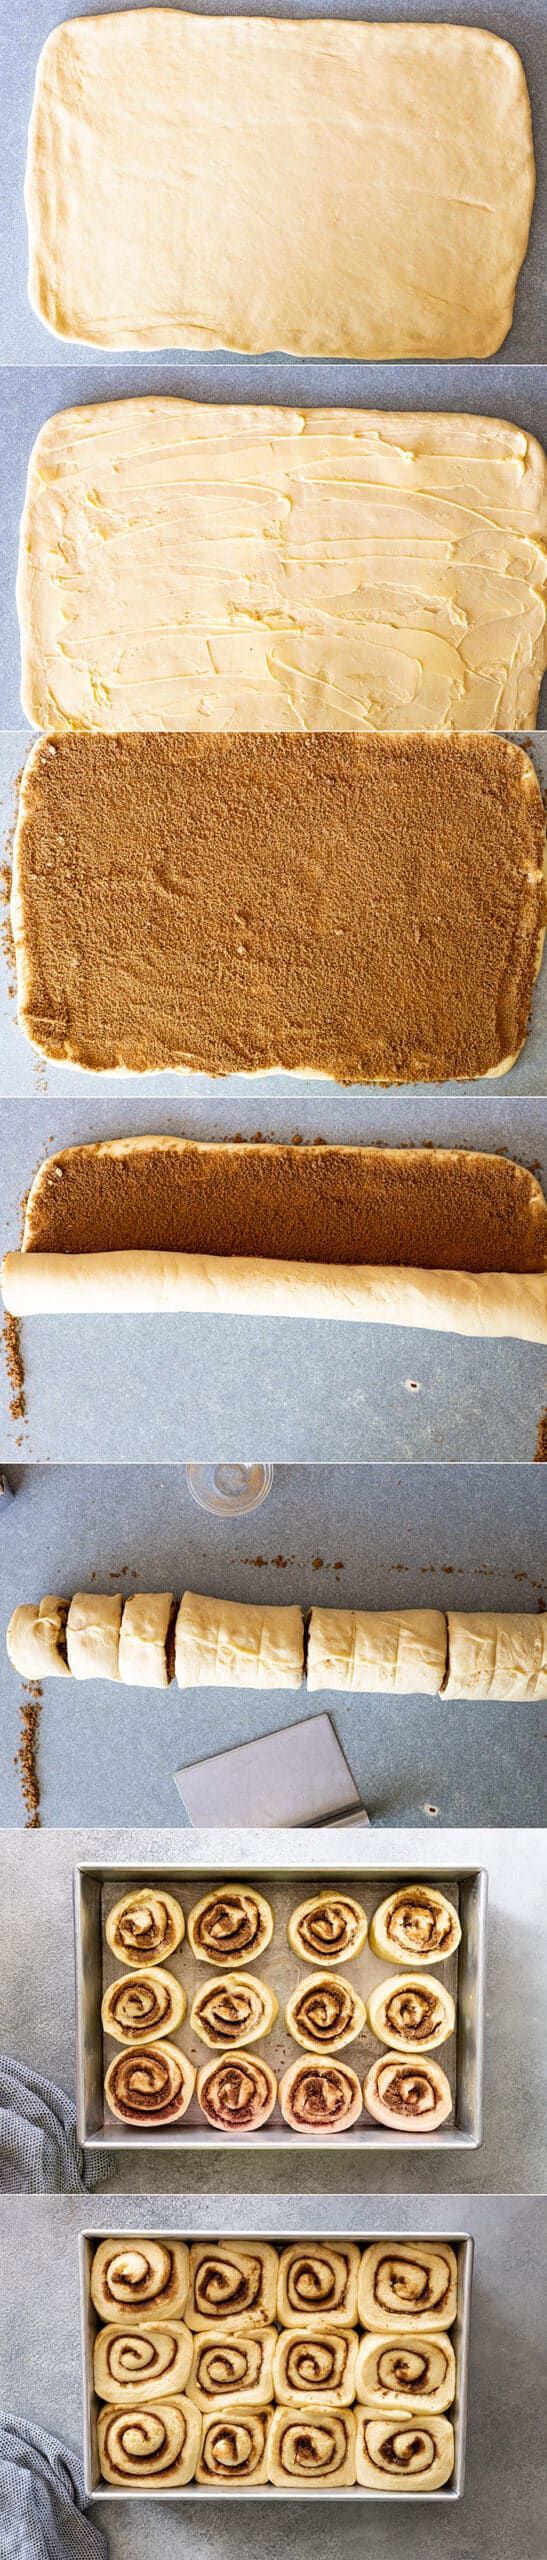 Seven pictures showing how to roll and cut cinnamon rolls. 